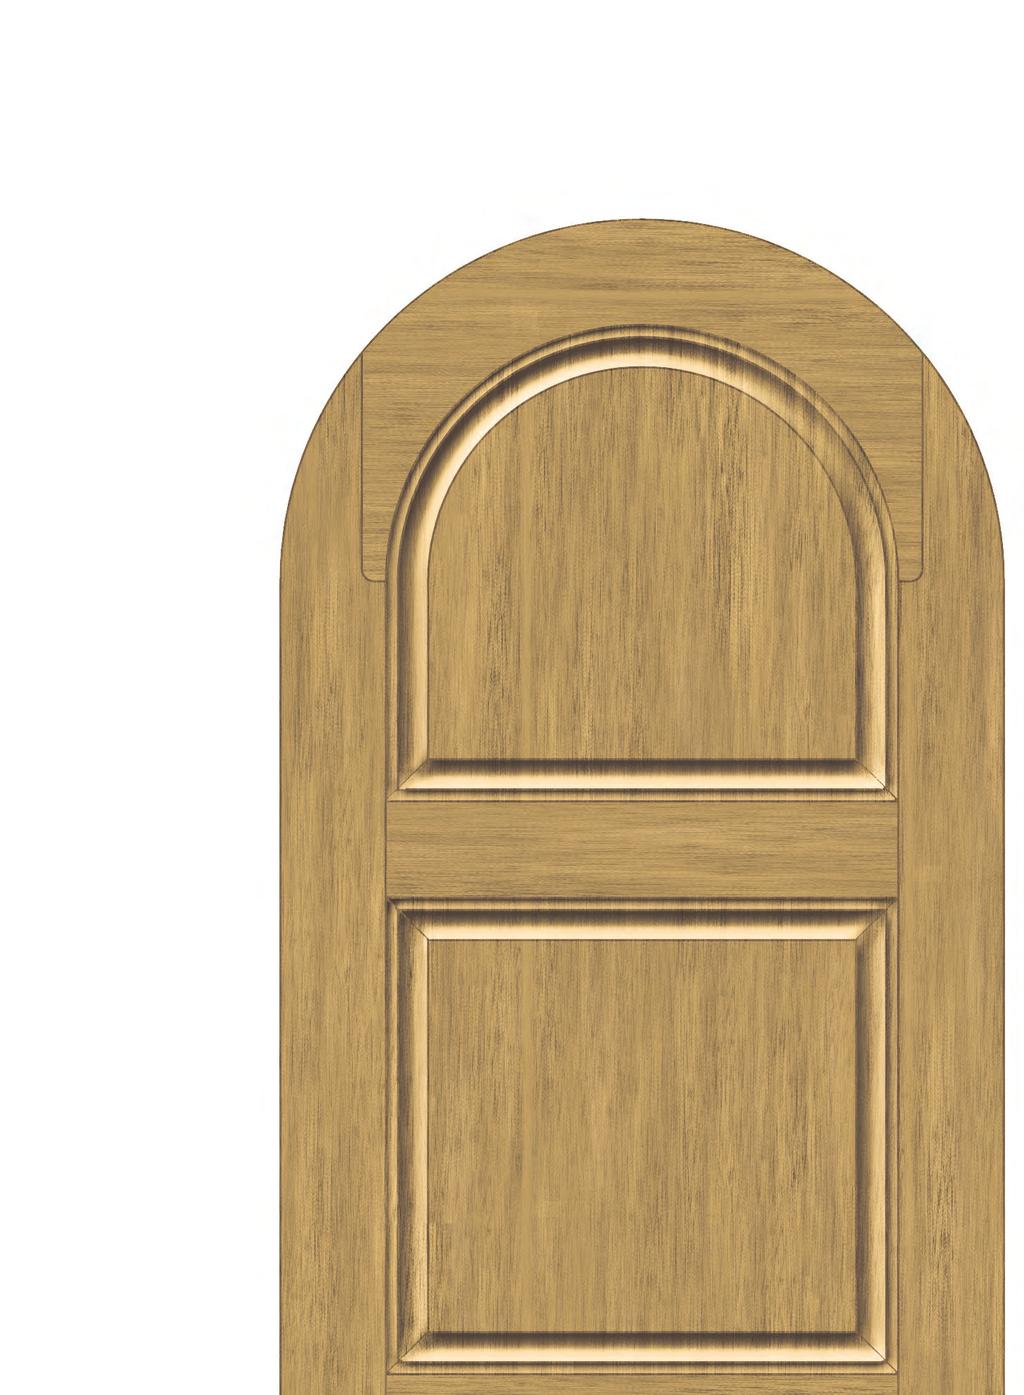 All doors are manufactured to match, giving your project a flawless, cohesive look from inside to out.